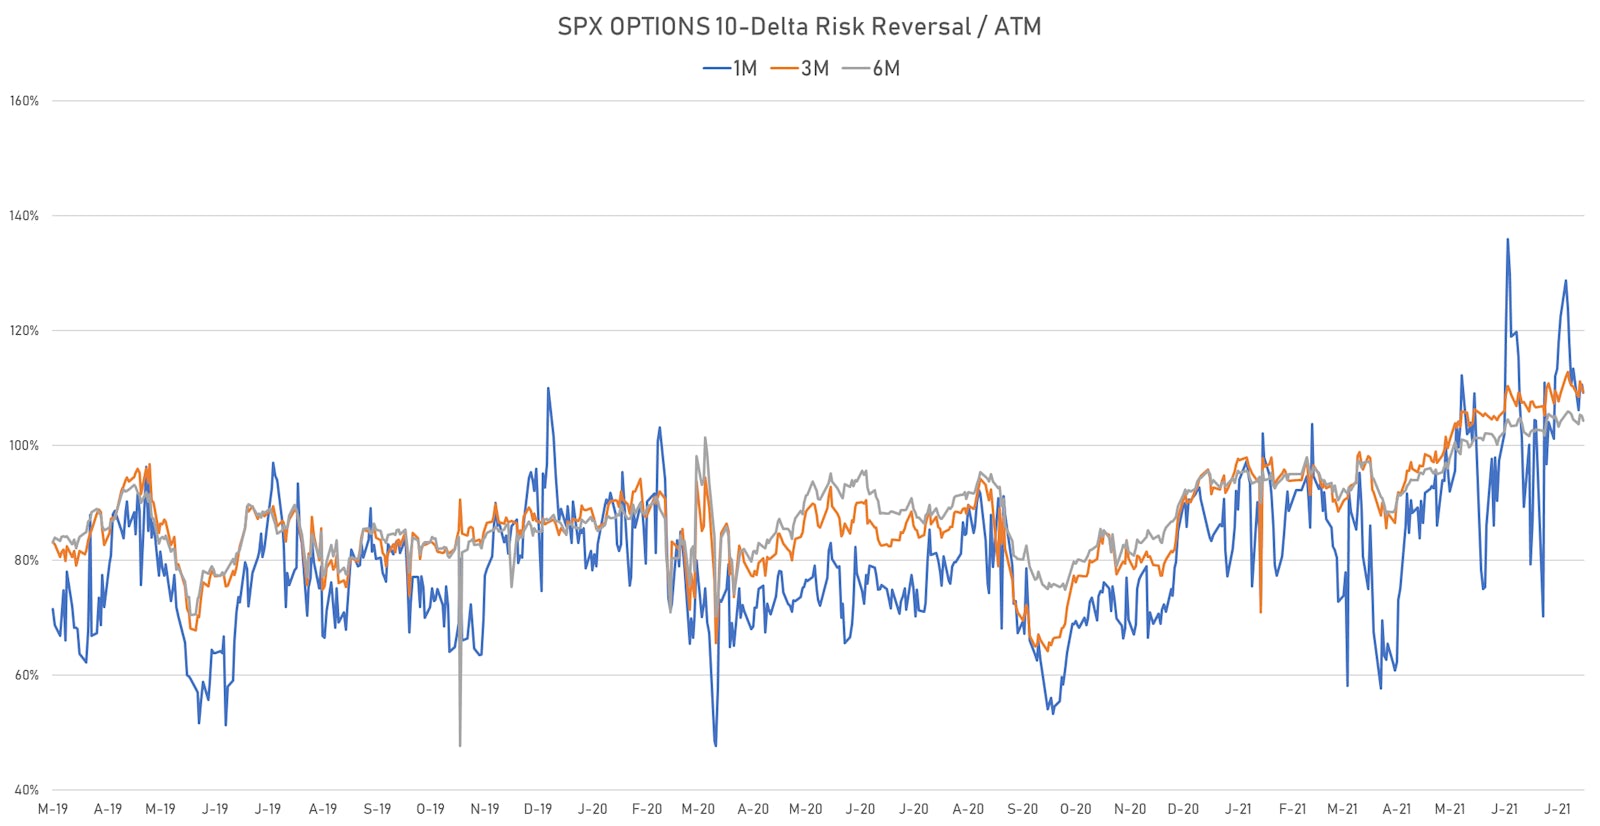 S&P 500 Options Less Skewed To The Downside Than Before The Start Of Earnings Season | Sources: ϕpost, Refinitiv data